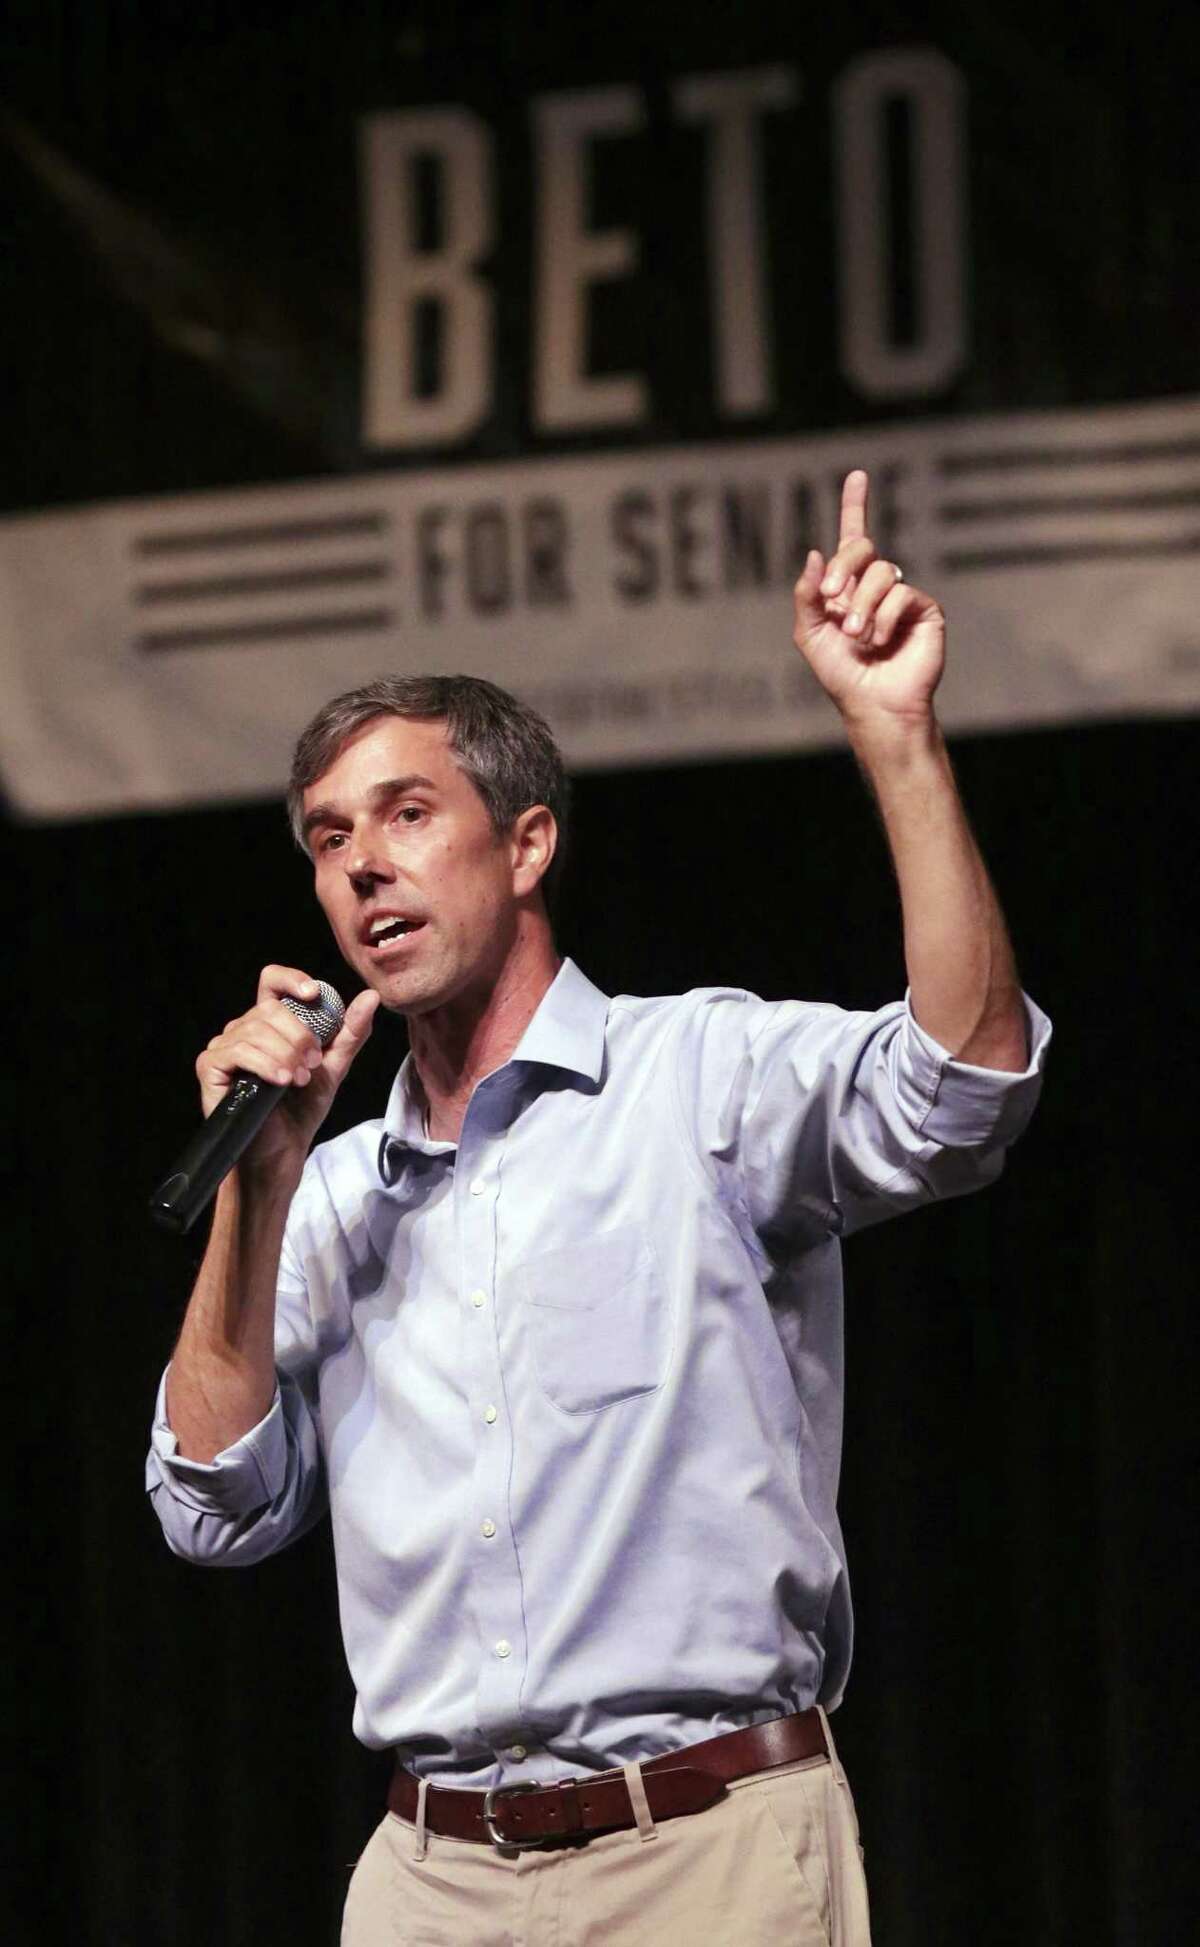 U.S. Congressman Beto O'Rourke hosts a campaign rally for educators at Carver Community Cultural Center on August 7, 2018.